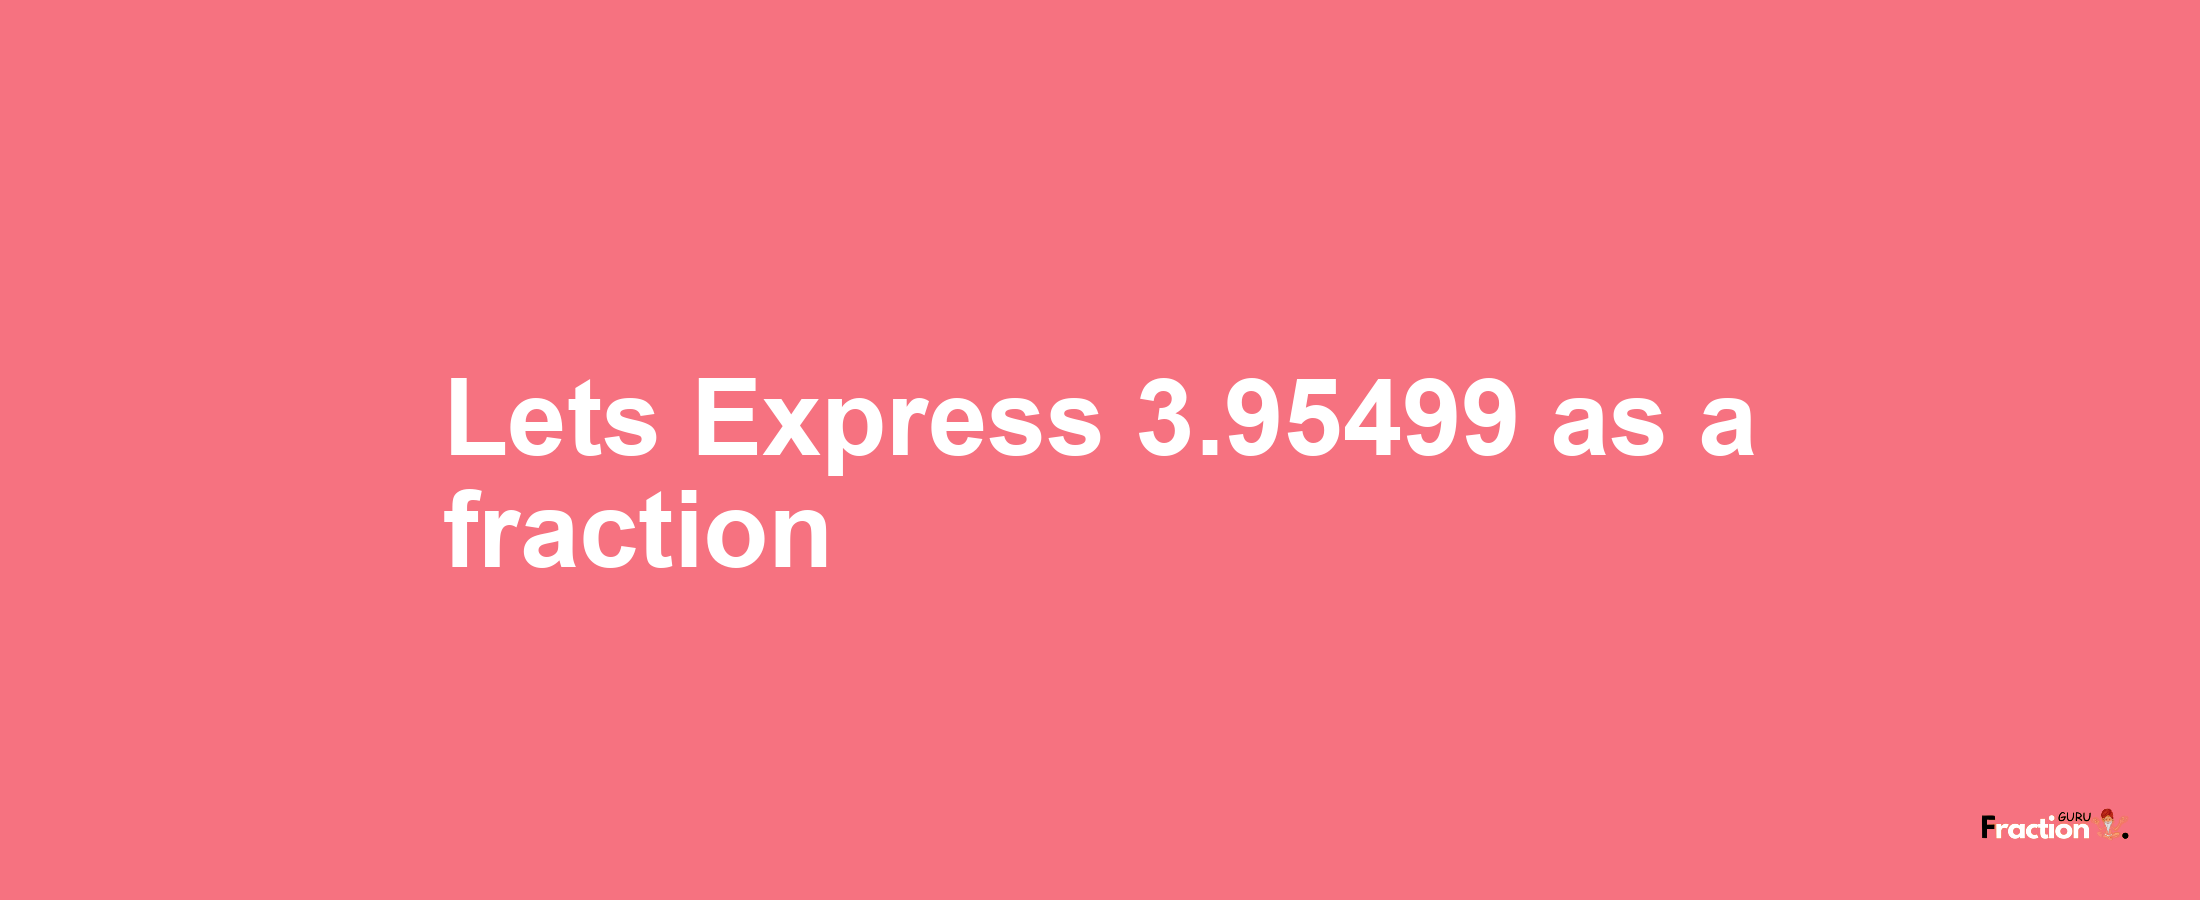 Lets Express 3.95499 as afraction